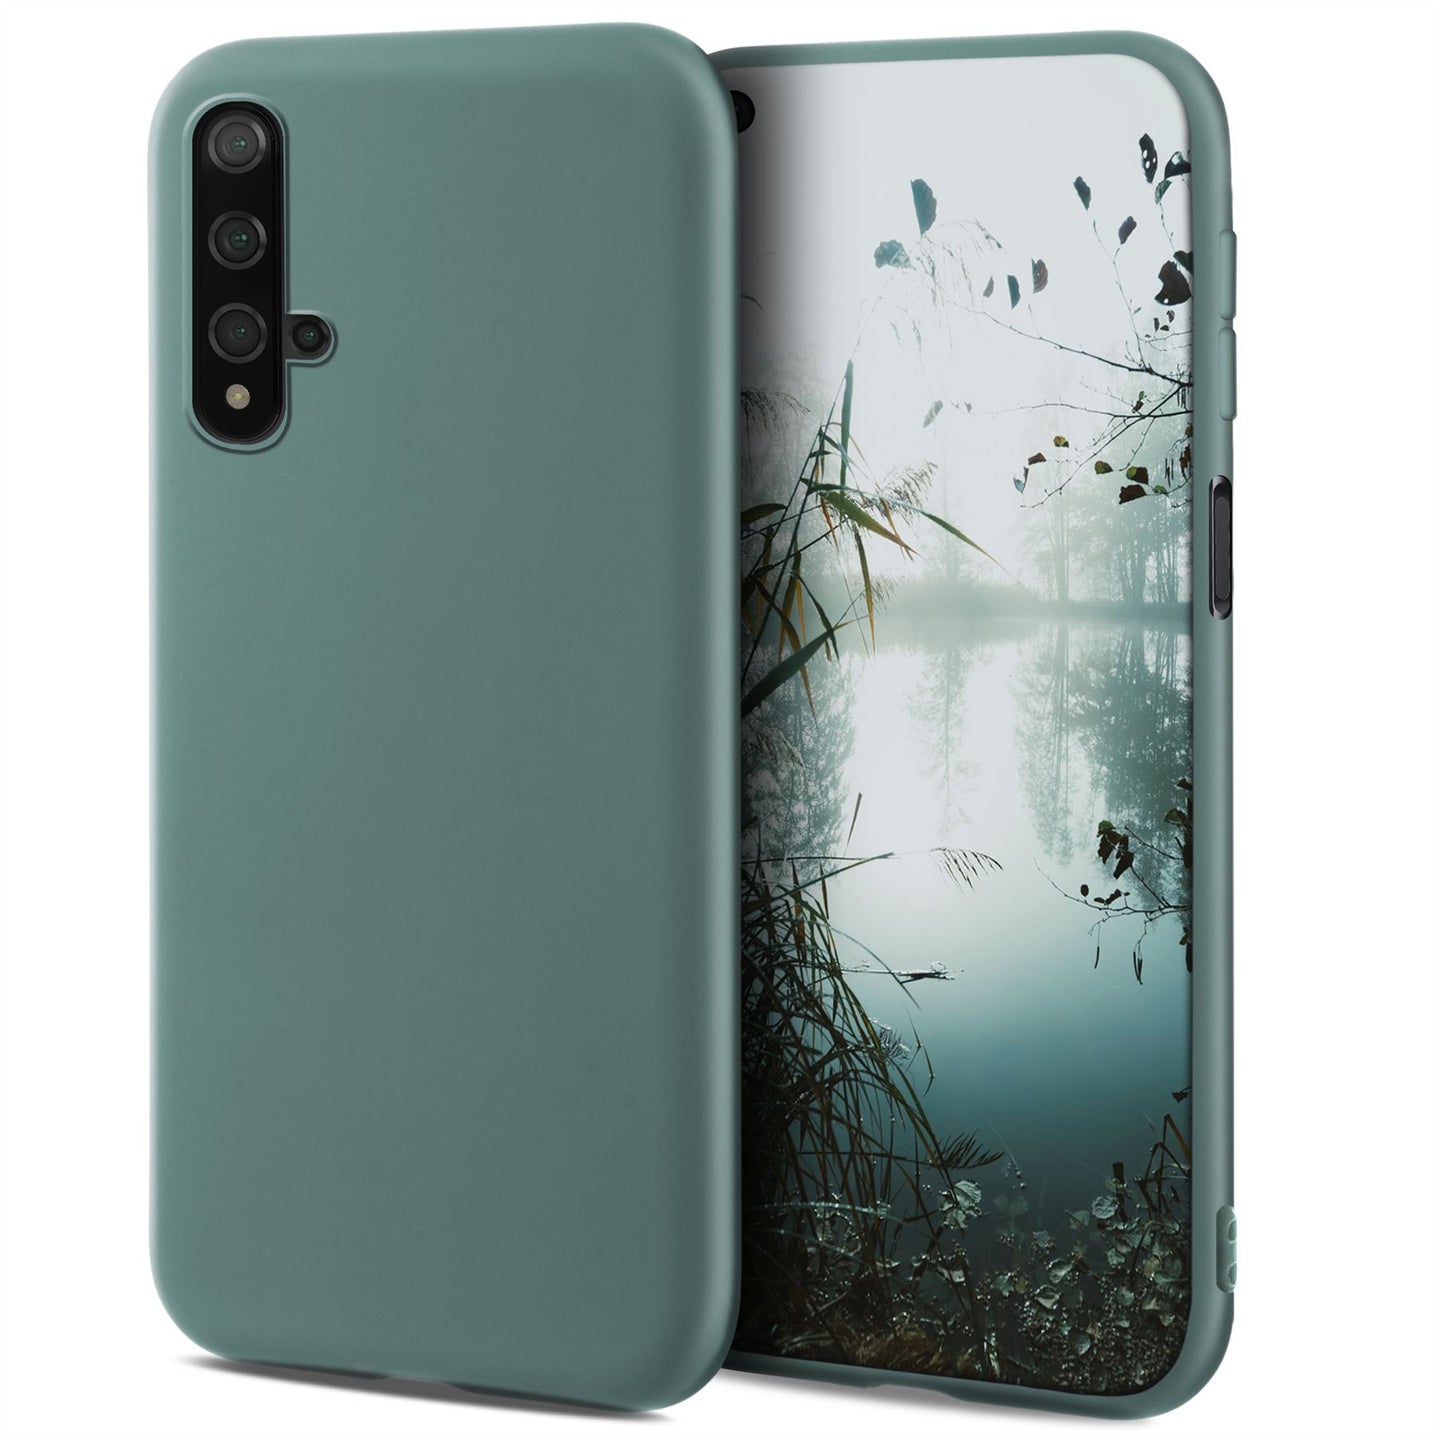 Moozy Minimalist Series Silicone Case for Huawei Nova 5T and Honor 20, Blue Grey - Matte Finish Slim Soft TPU Cover